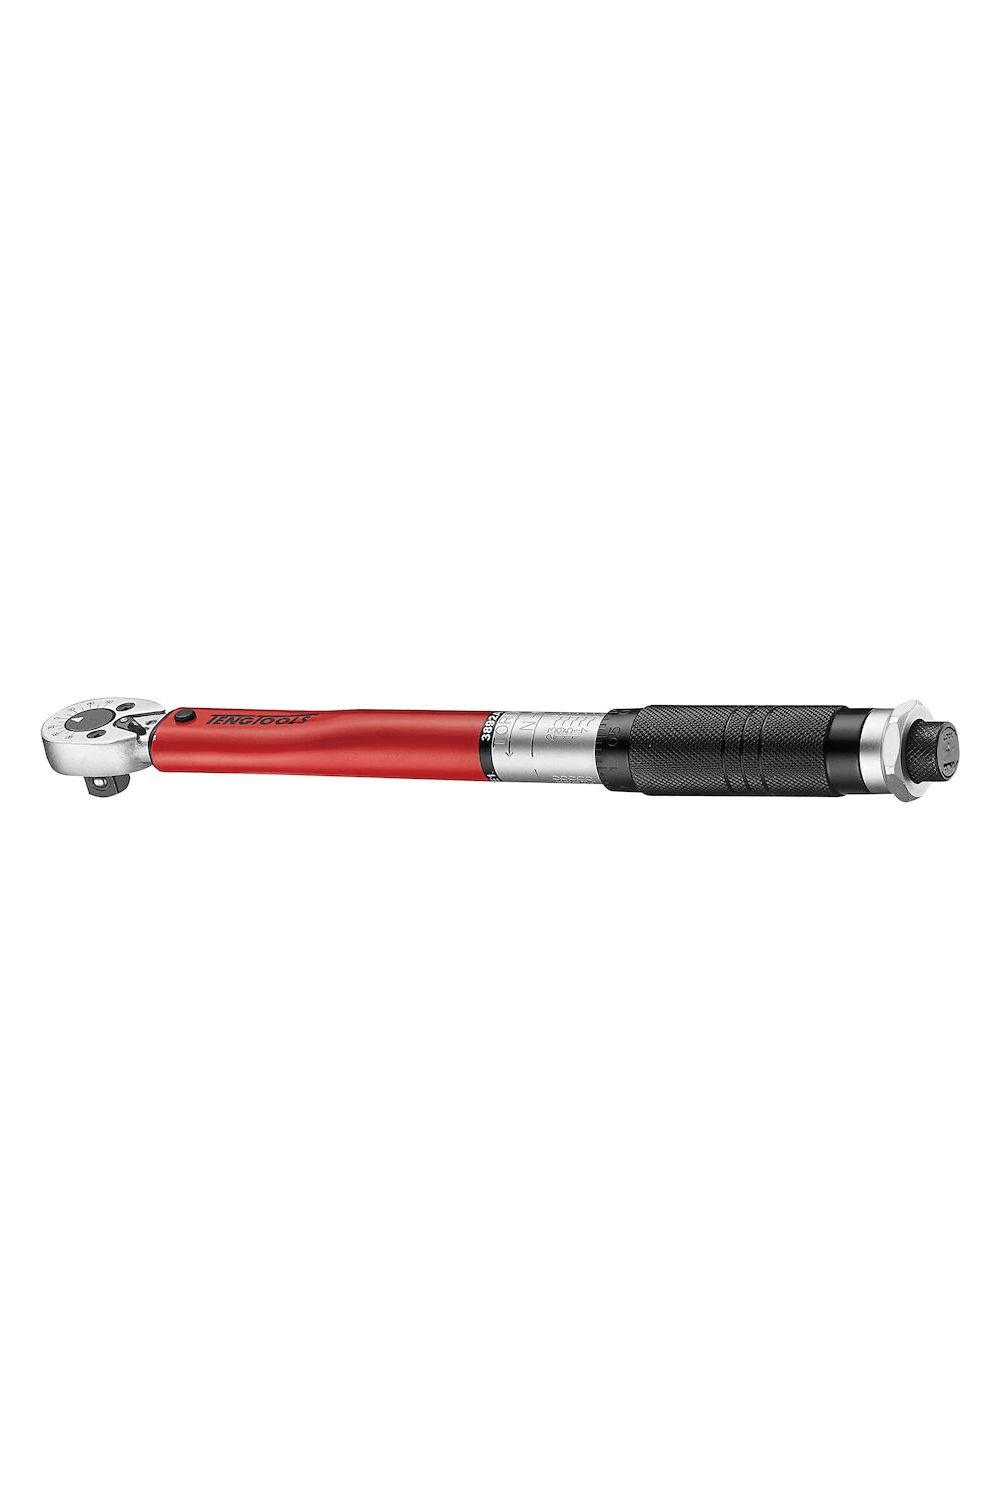 TENG TOOLS 3/8INCH DRIVE TORQUE WRENCH 5-25NM - Elite Renewable Solutions